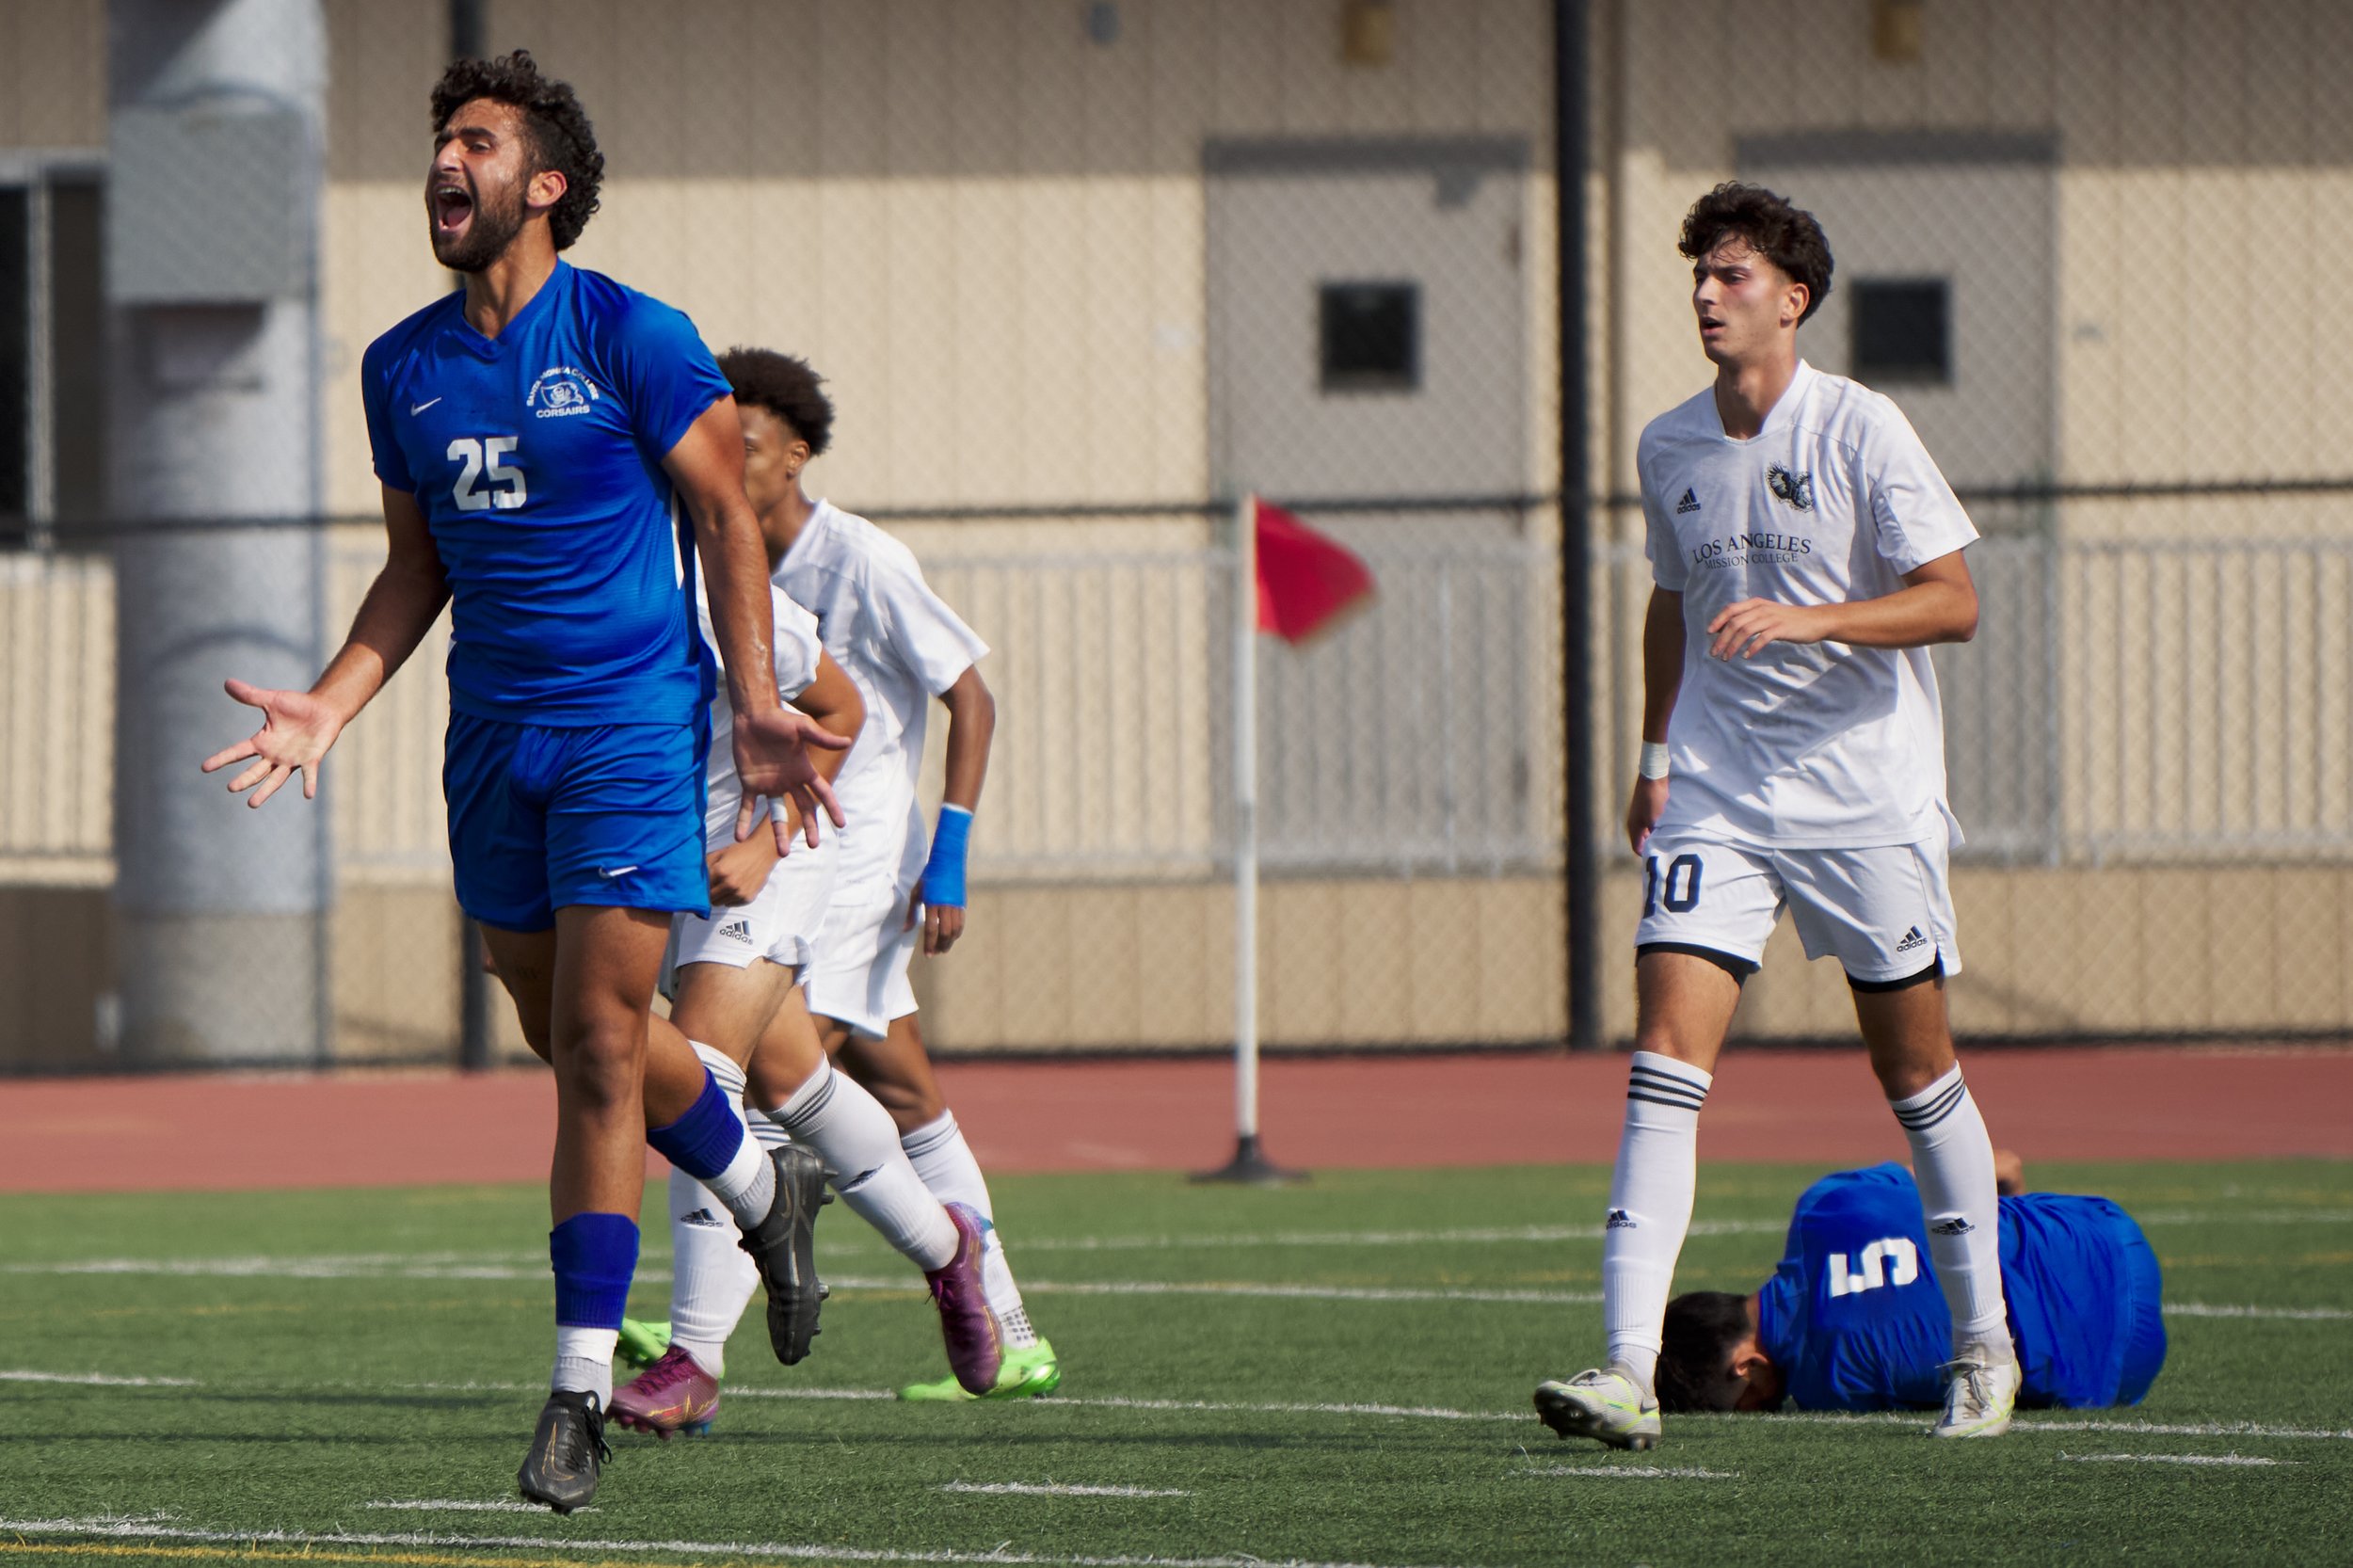  Santa Monica College Corsairs' Adam Abou-Hamad complains after Los Angeles Mission College Eagles' Rivaldo Moreno (not visible), pictured with Yahav Arviv (right), committed an aggressive foul against Jose Urdiano (bottom right) during the men's soc